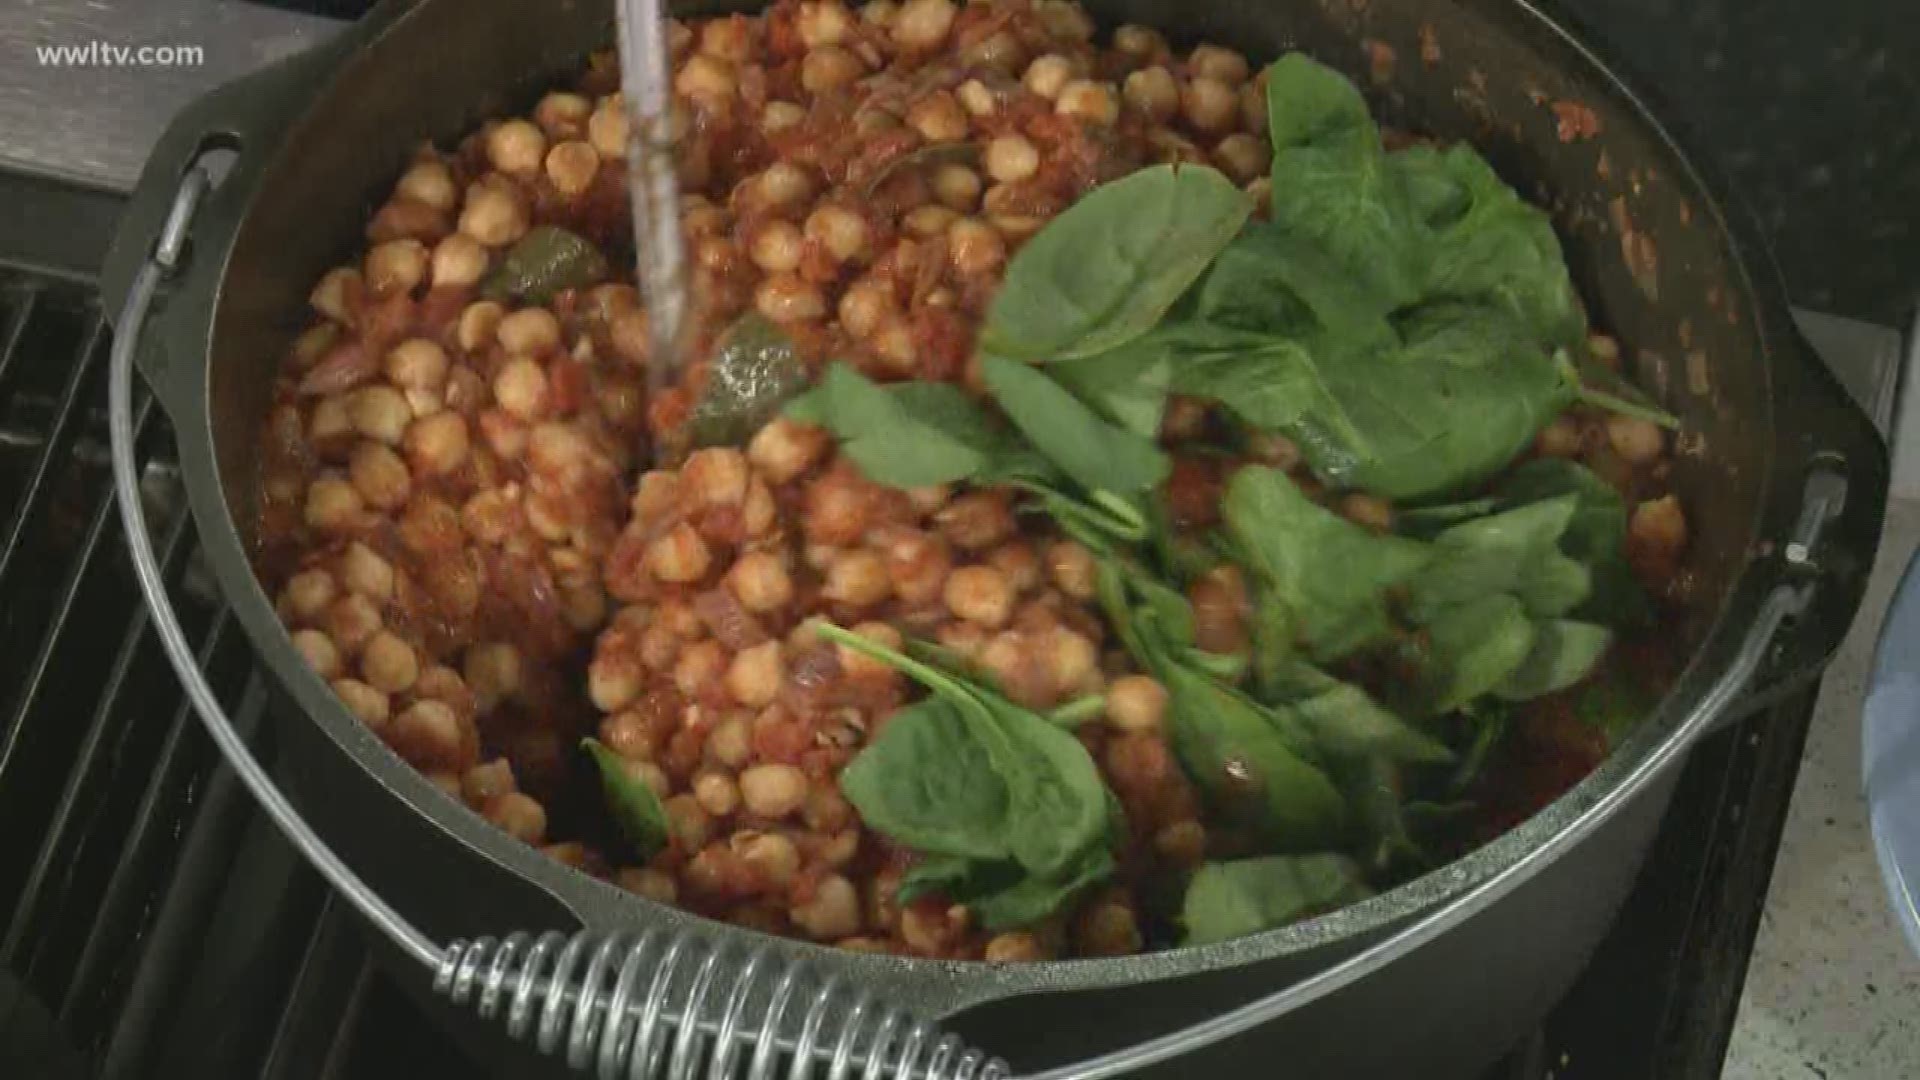 Chef Kevin is in the kitchen cooking up a quick, delicious and healthy summer time meal including Chickpeas.